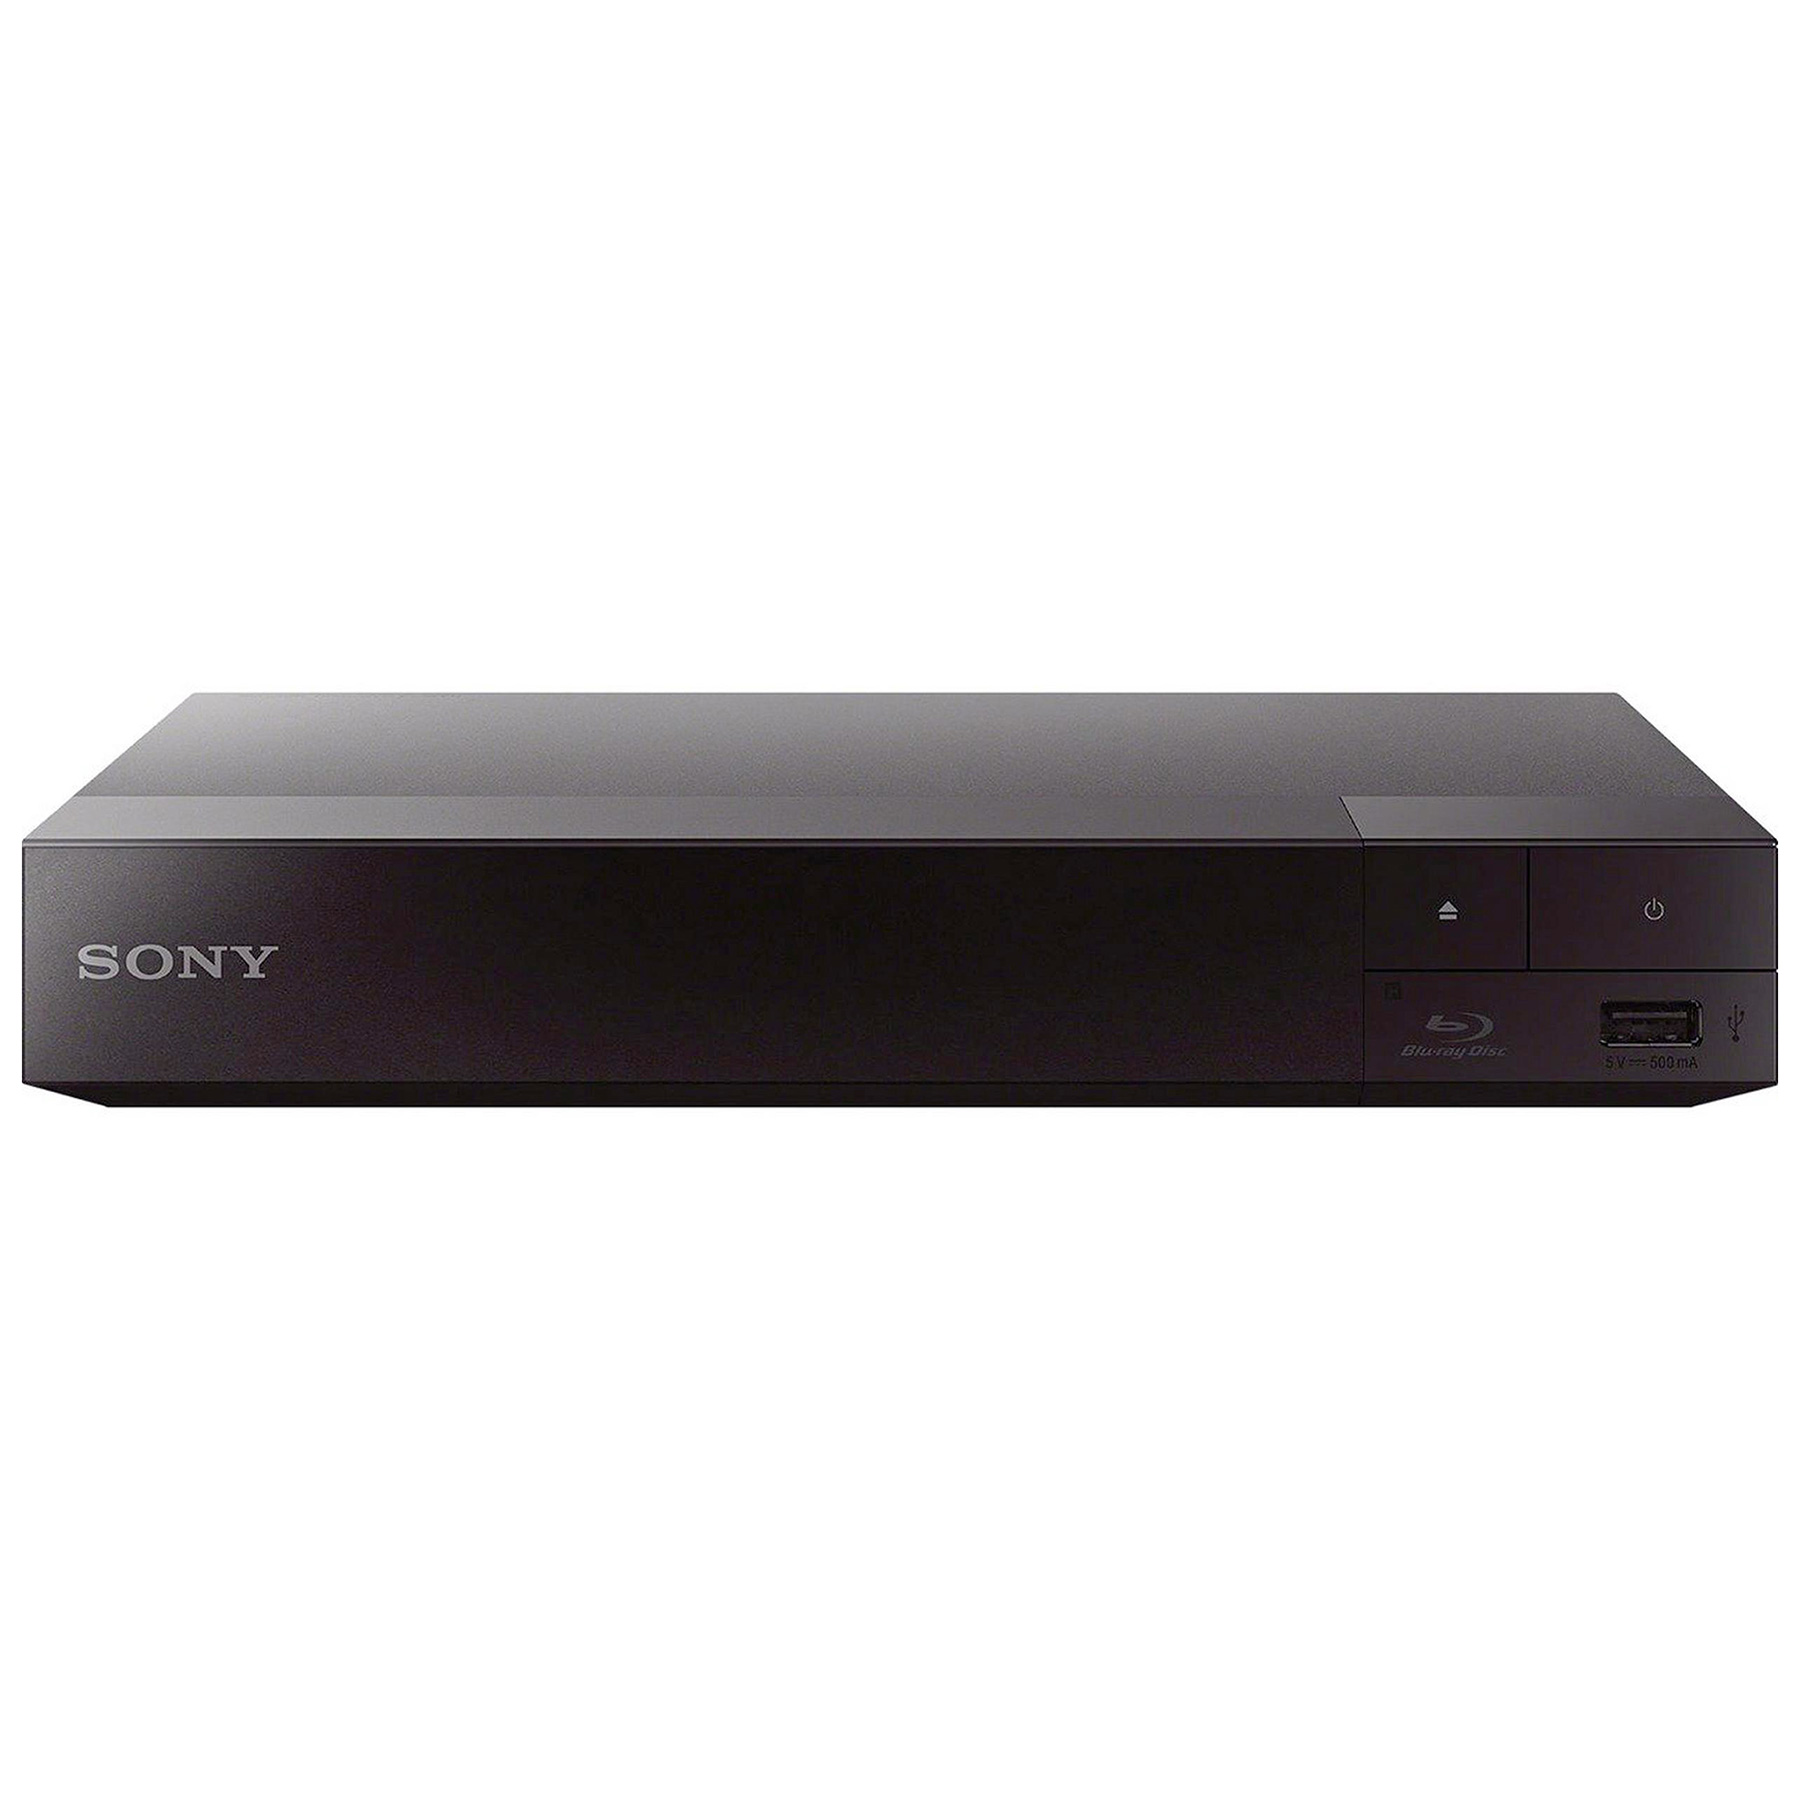 Image of Sony BDPS1700B Blu Ray Player Full HD 1080p in Black